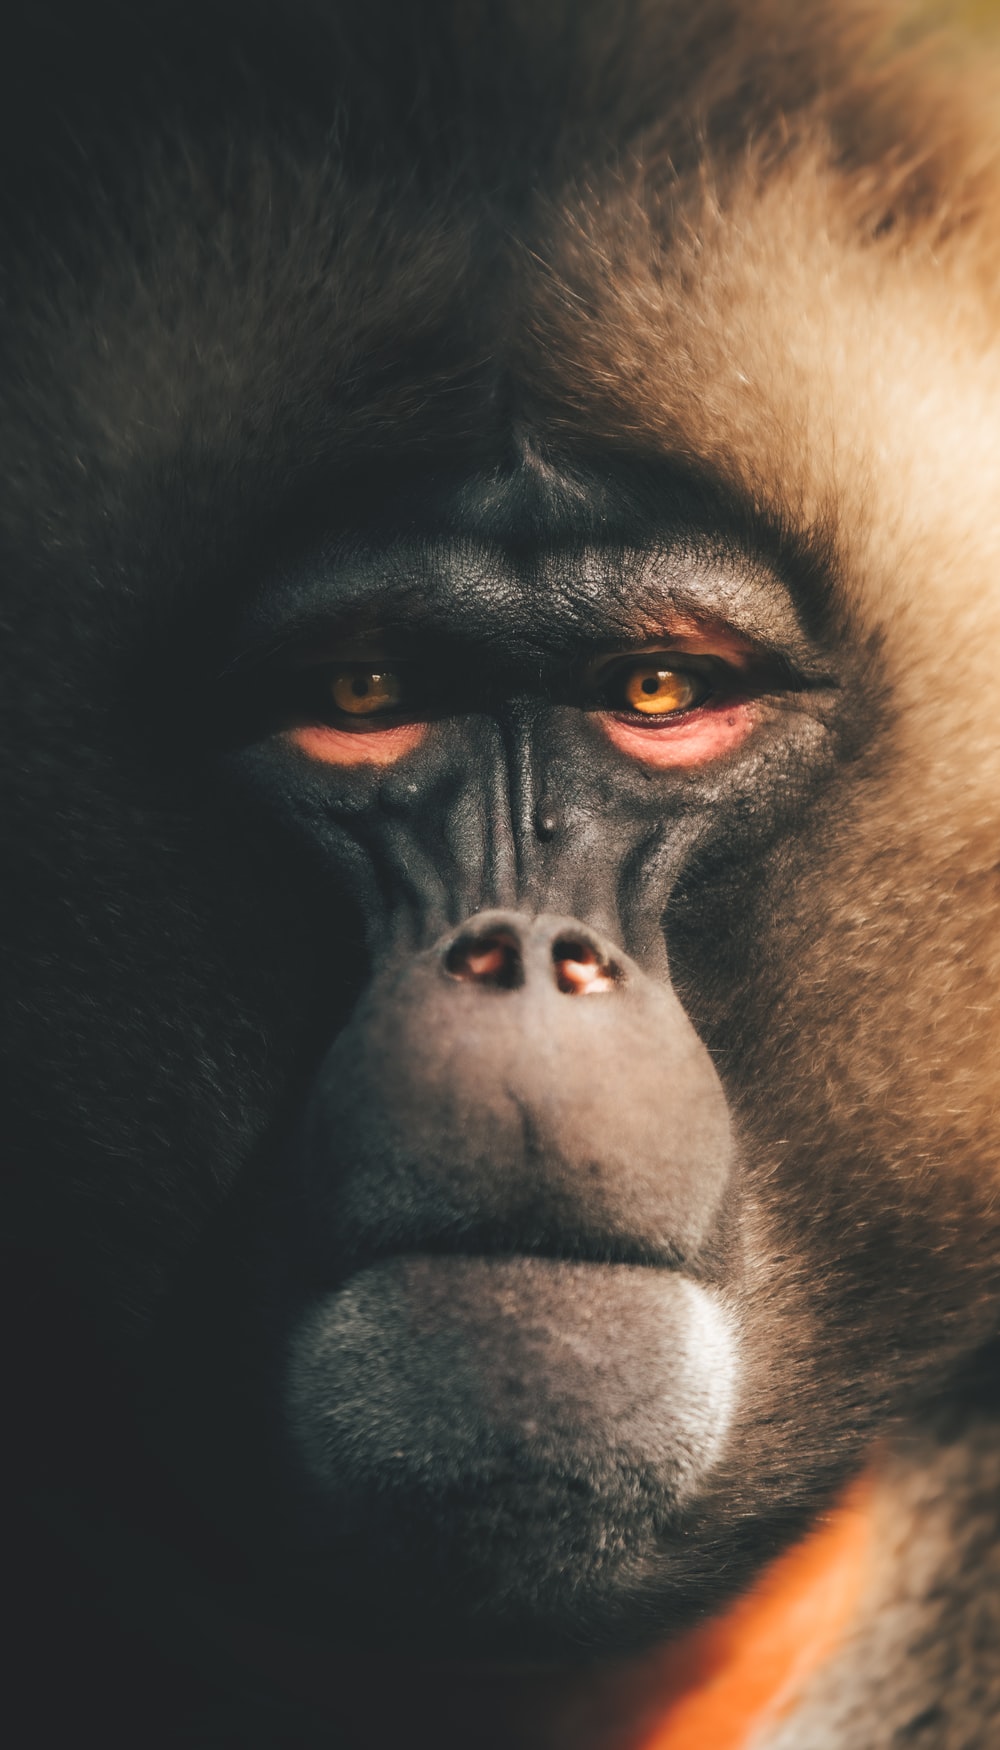 Monkey Picture [HD]. Download Free Image